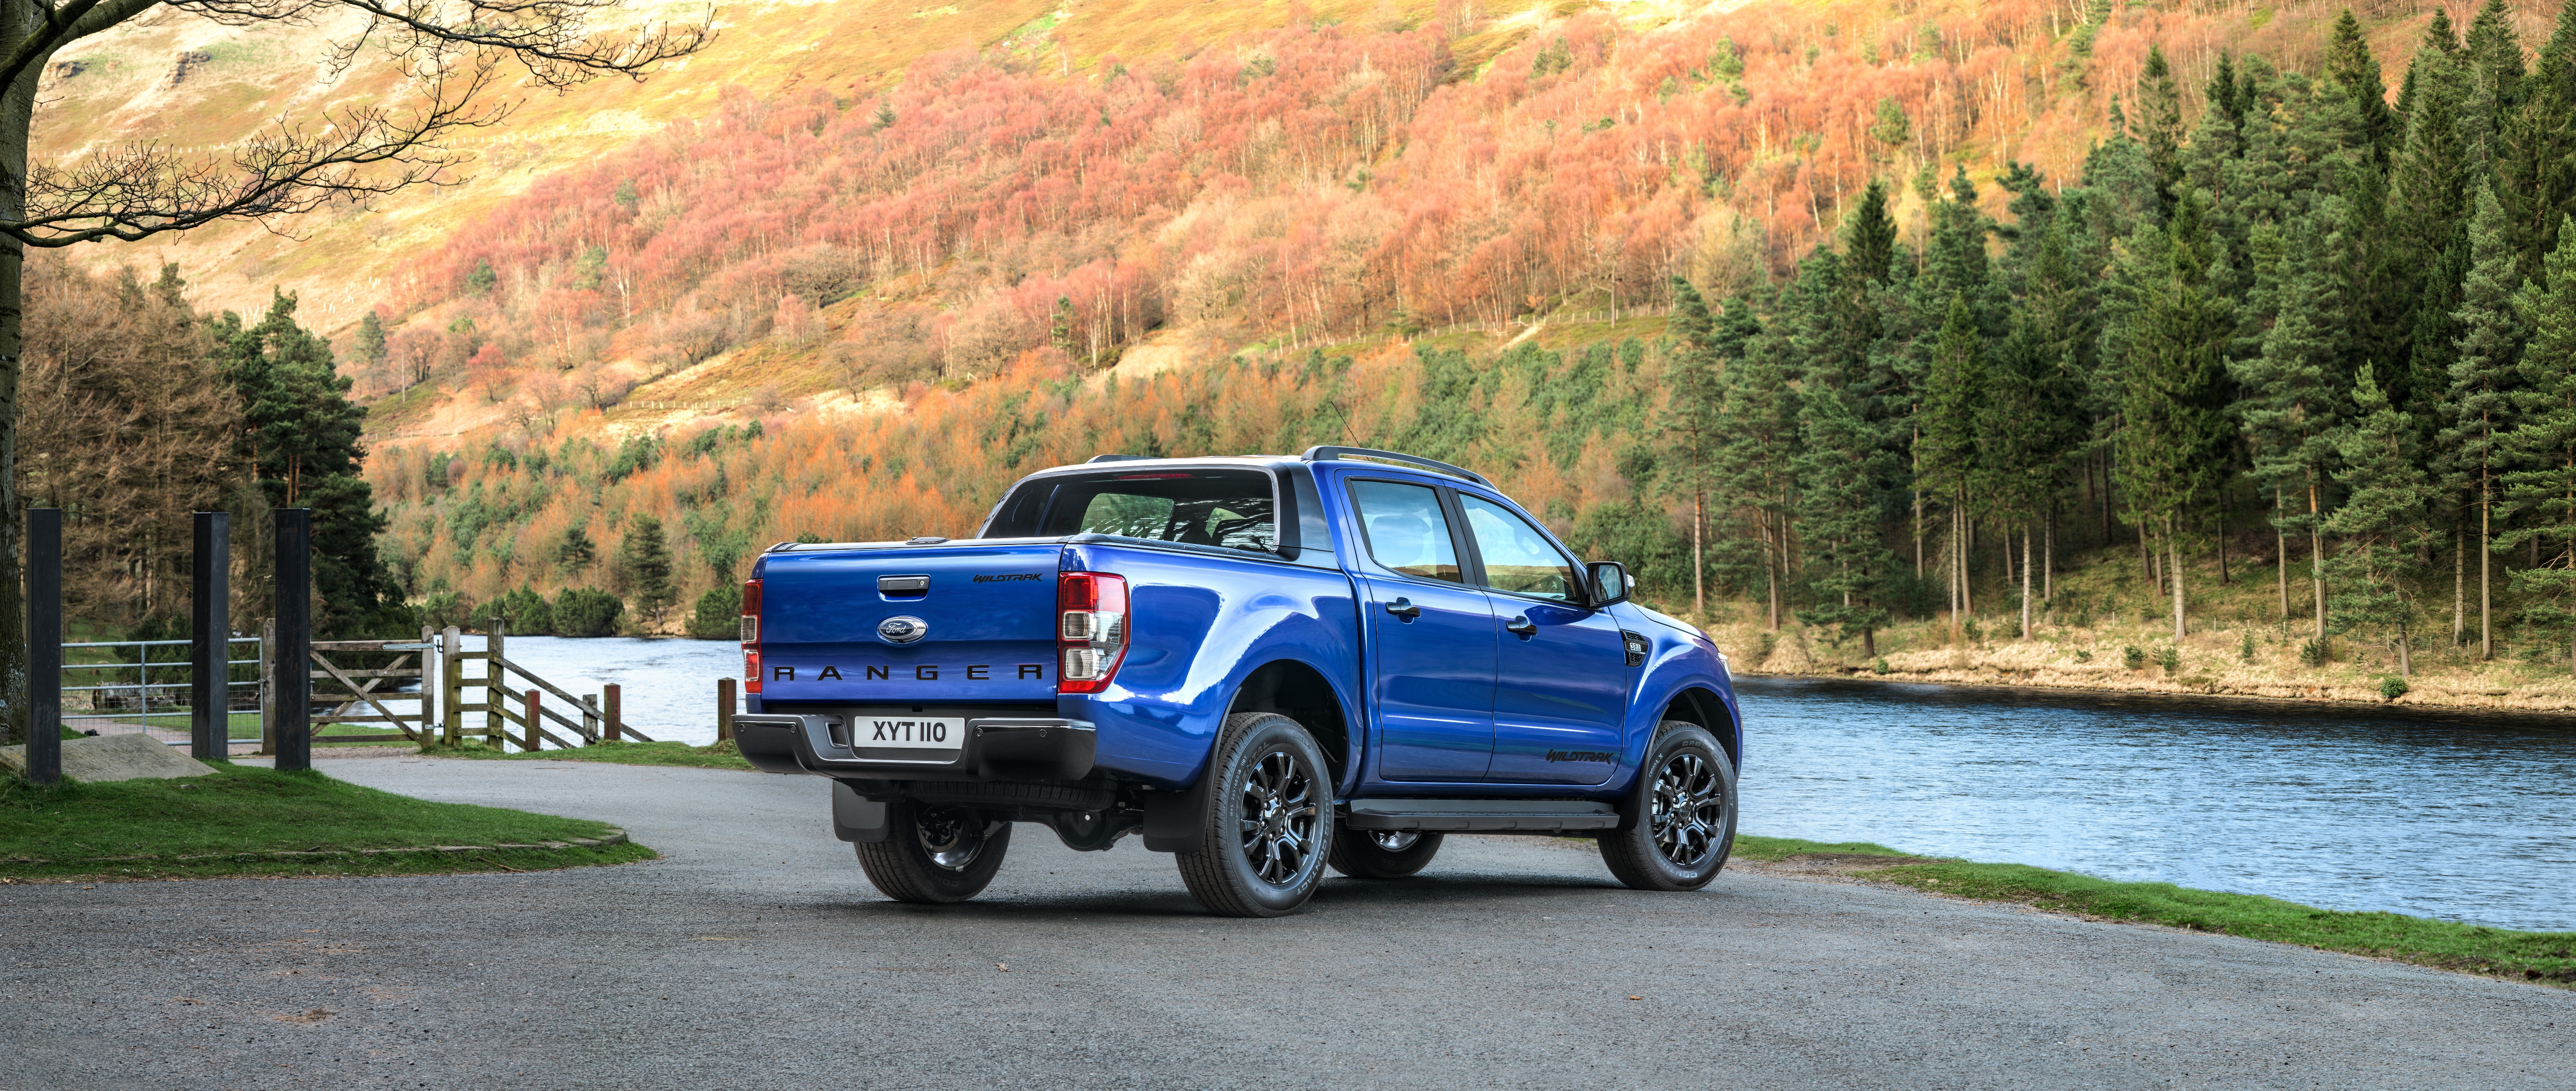 Ford Ranger hd restyling